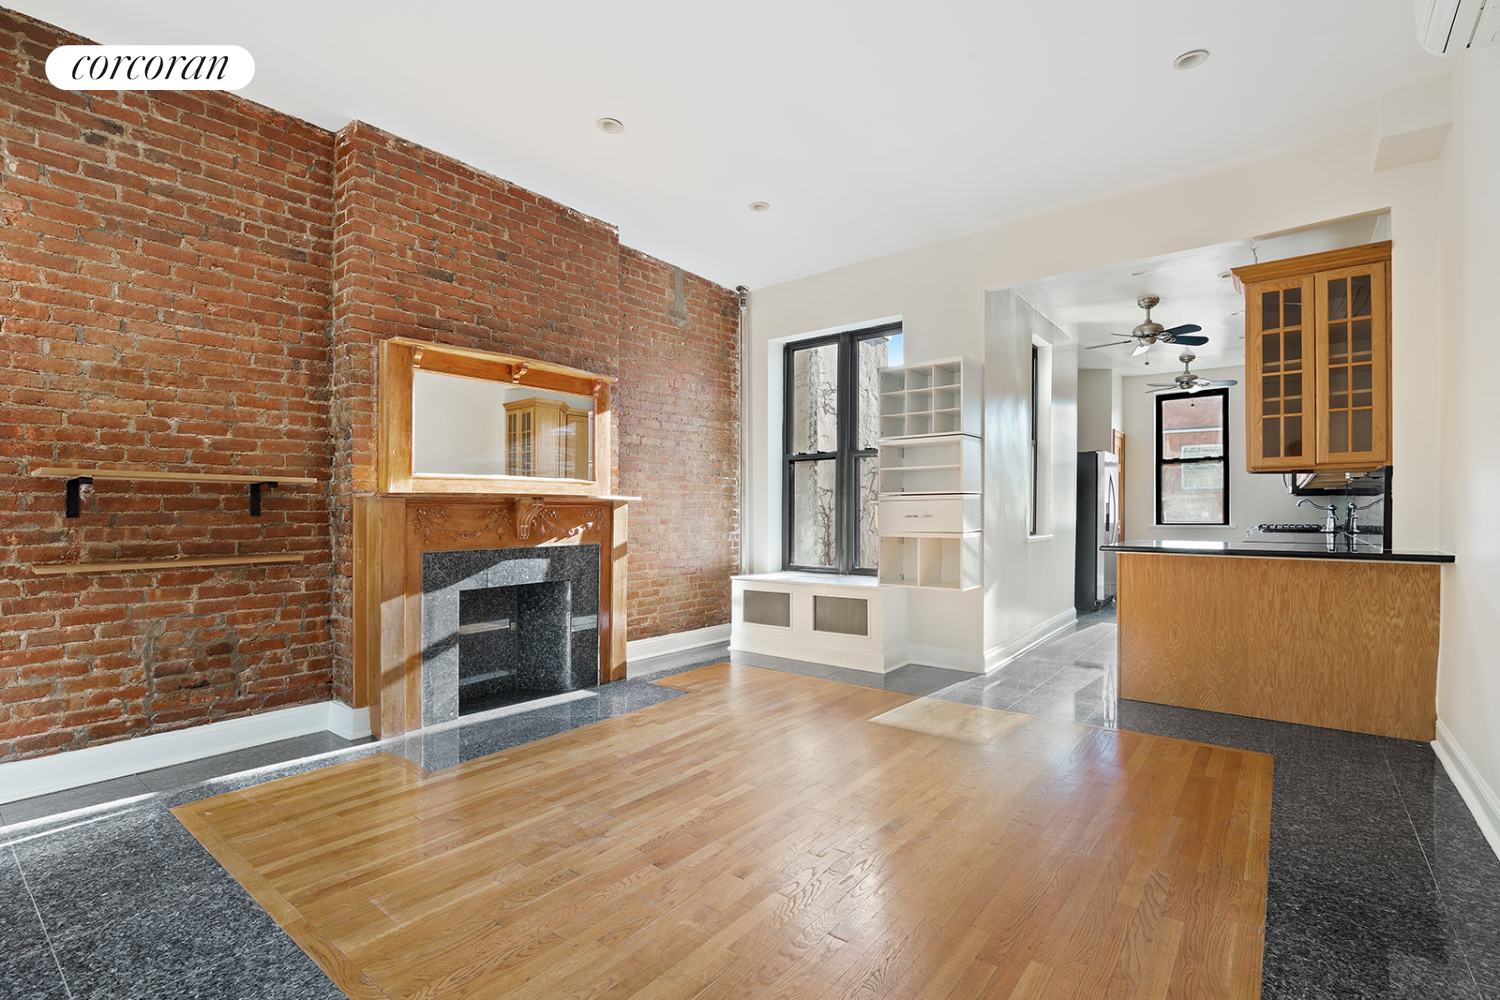 292 West 137th Street, Central Harlem, Upper Manhattan, NYC - 5 Bedrooms  
4 Bathrooms  
12 Rooms - 